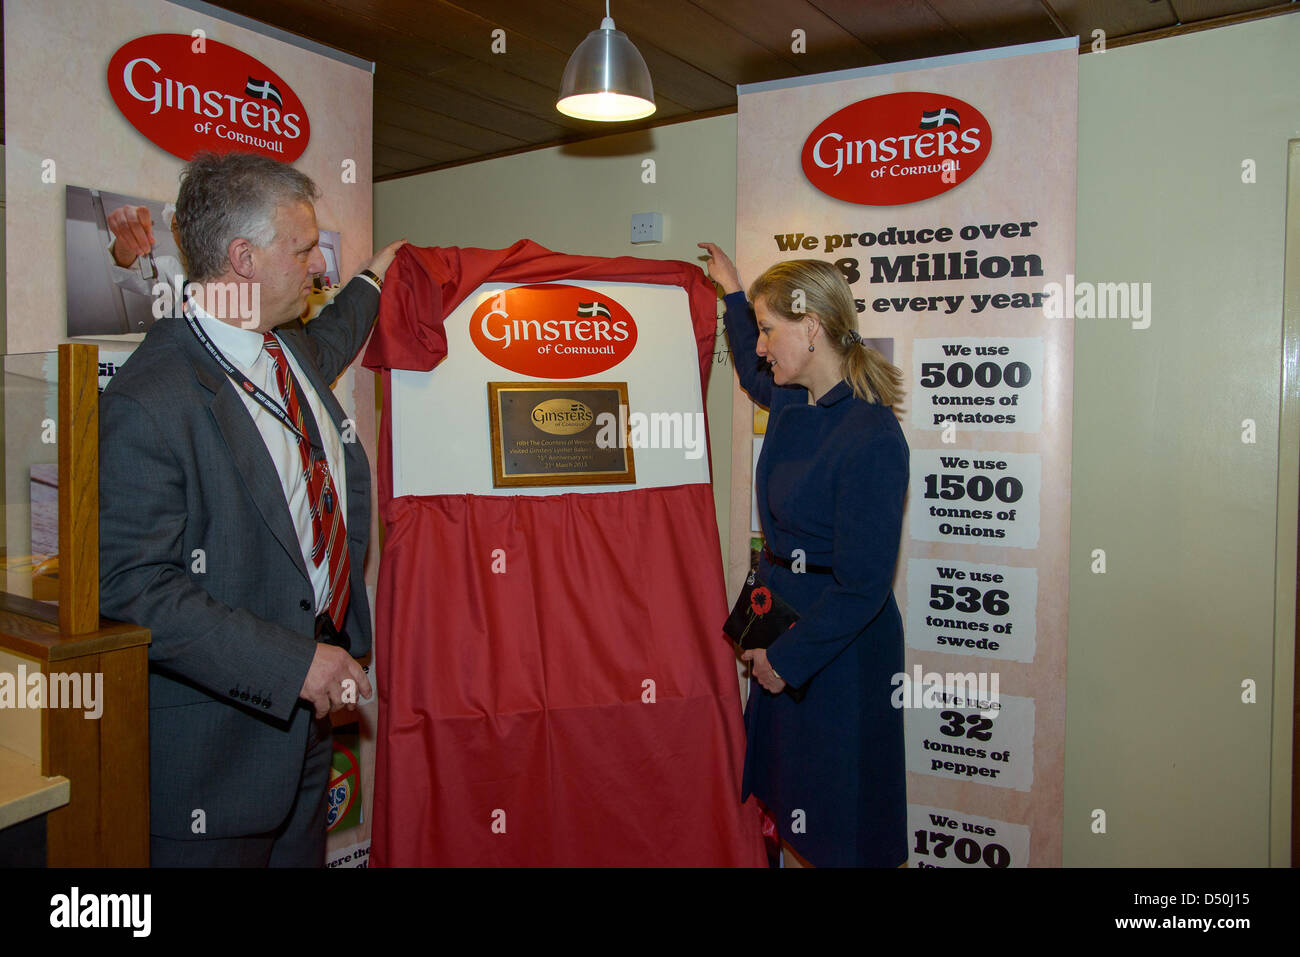 Callington, Cornwall, UK. 21st March 2013. Visits of Countess of Wessex unveiling plaque to celebrate 25th anniversary of Ginsters Callington and MD Mark Duddridge of Ginsters..  Credit:  Sean Hernon / Alamy Live News Stock Photo